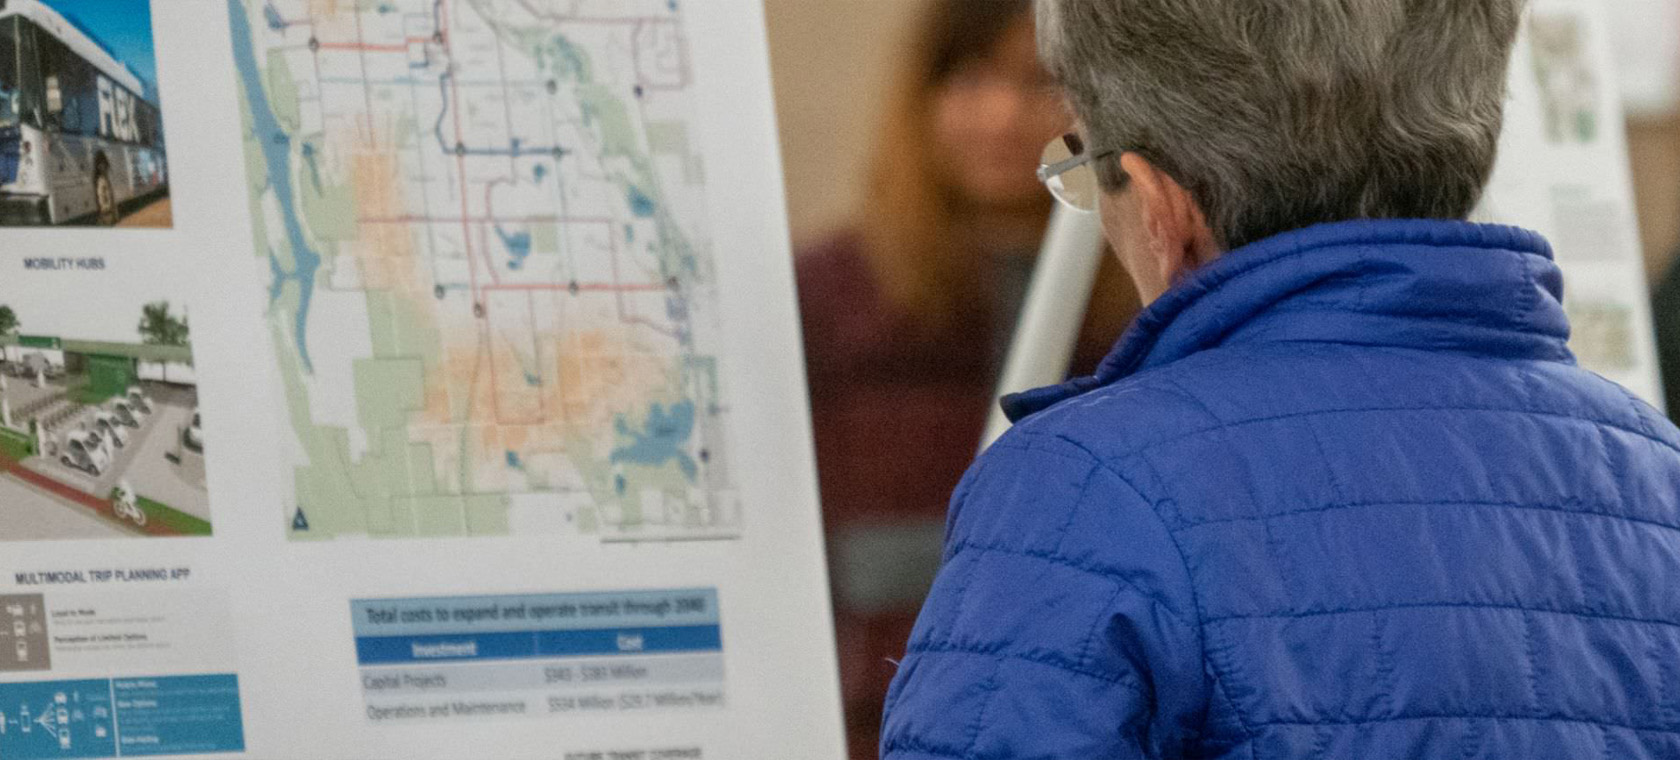 older person looking at map of bus schedules